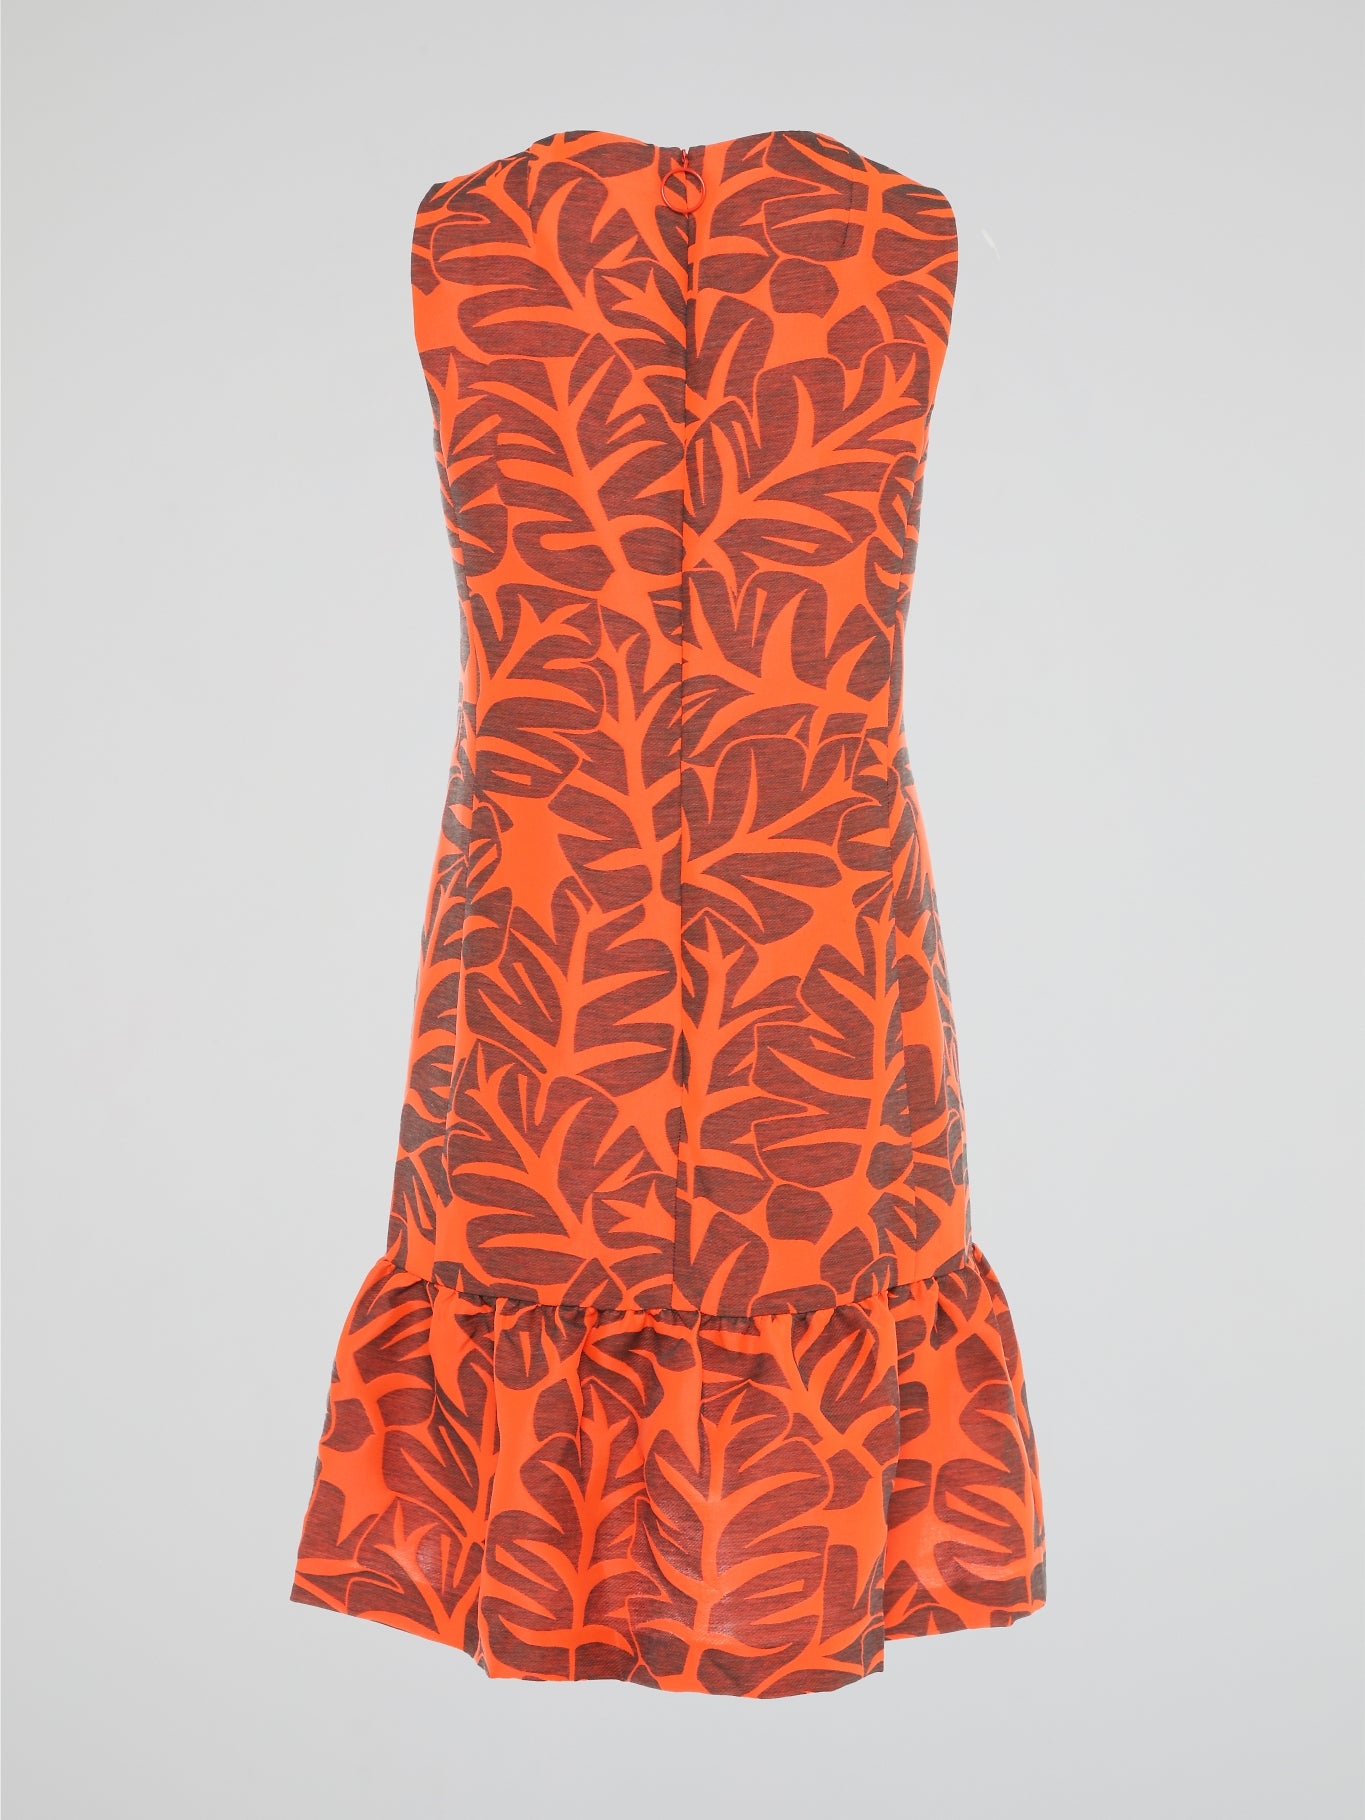 Get ready to twirl and strut in style with the Orange Flared Hem Dress from Akris Punto! This vibrant and playful dress features a flirty flared hem that adds a touch of sass to your ensemble. With its eye-catching orange hue, this dress is perfect for making a statement at any occasion, from brunch with friends to a night out on the town.